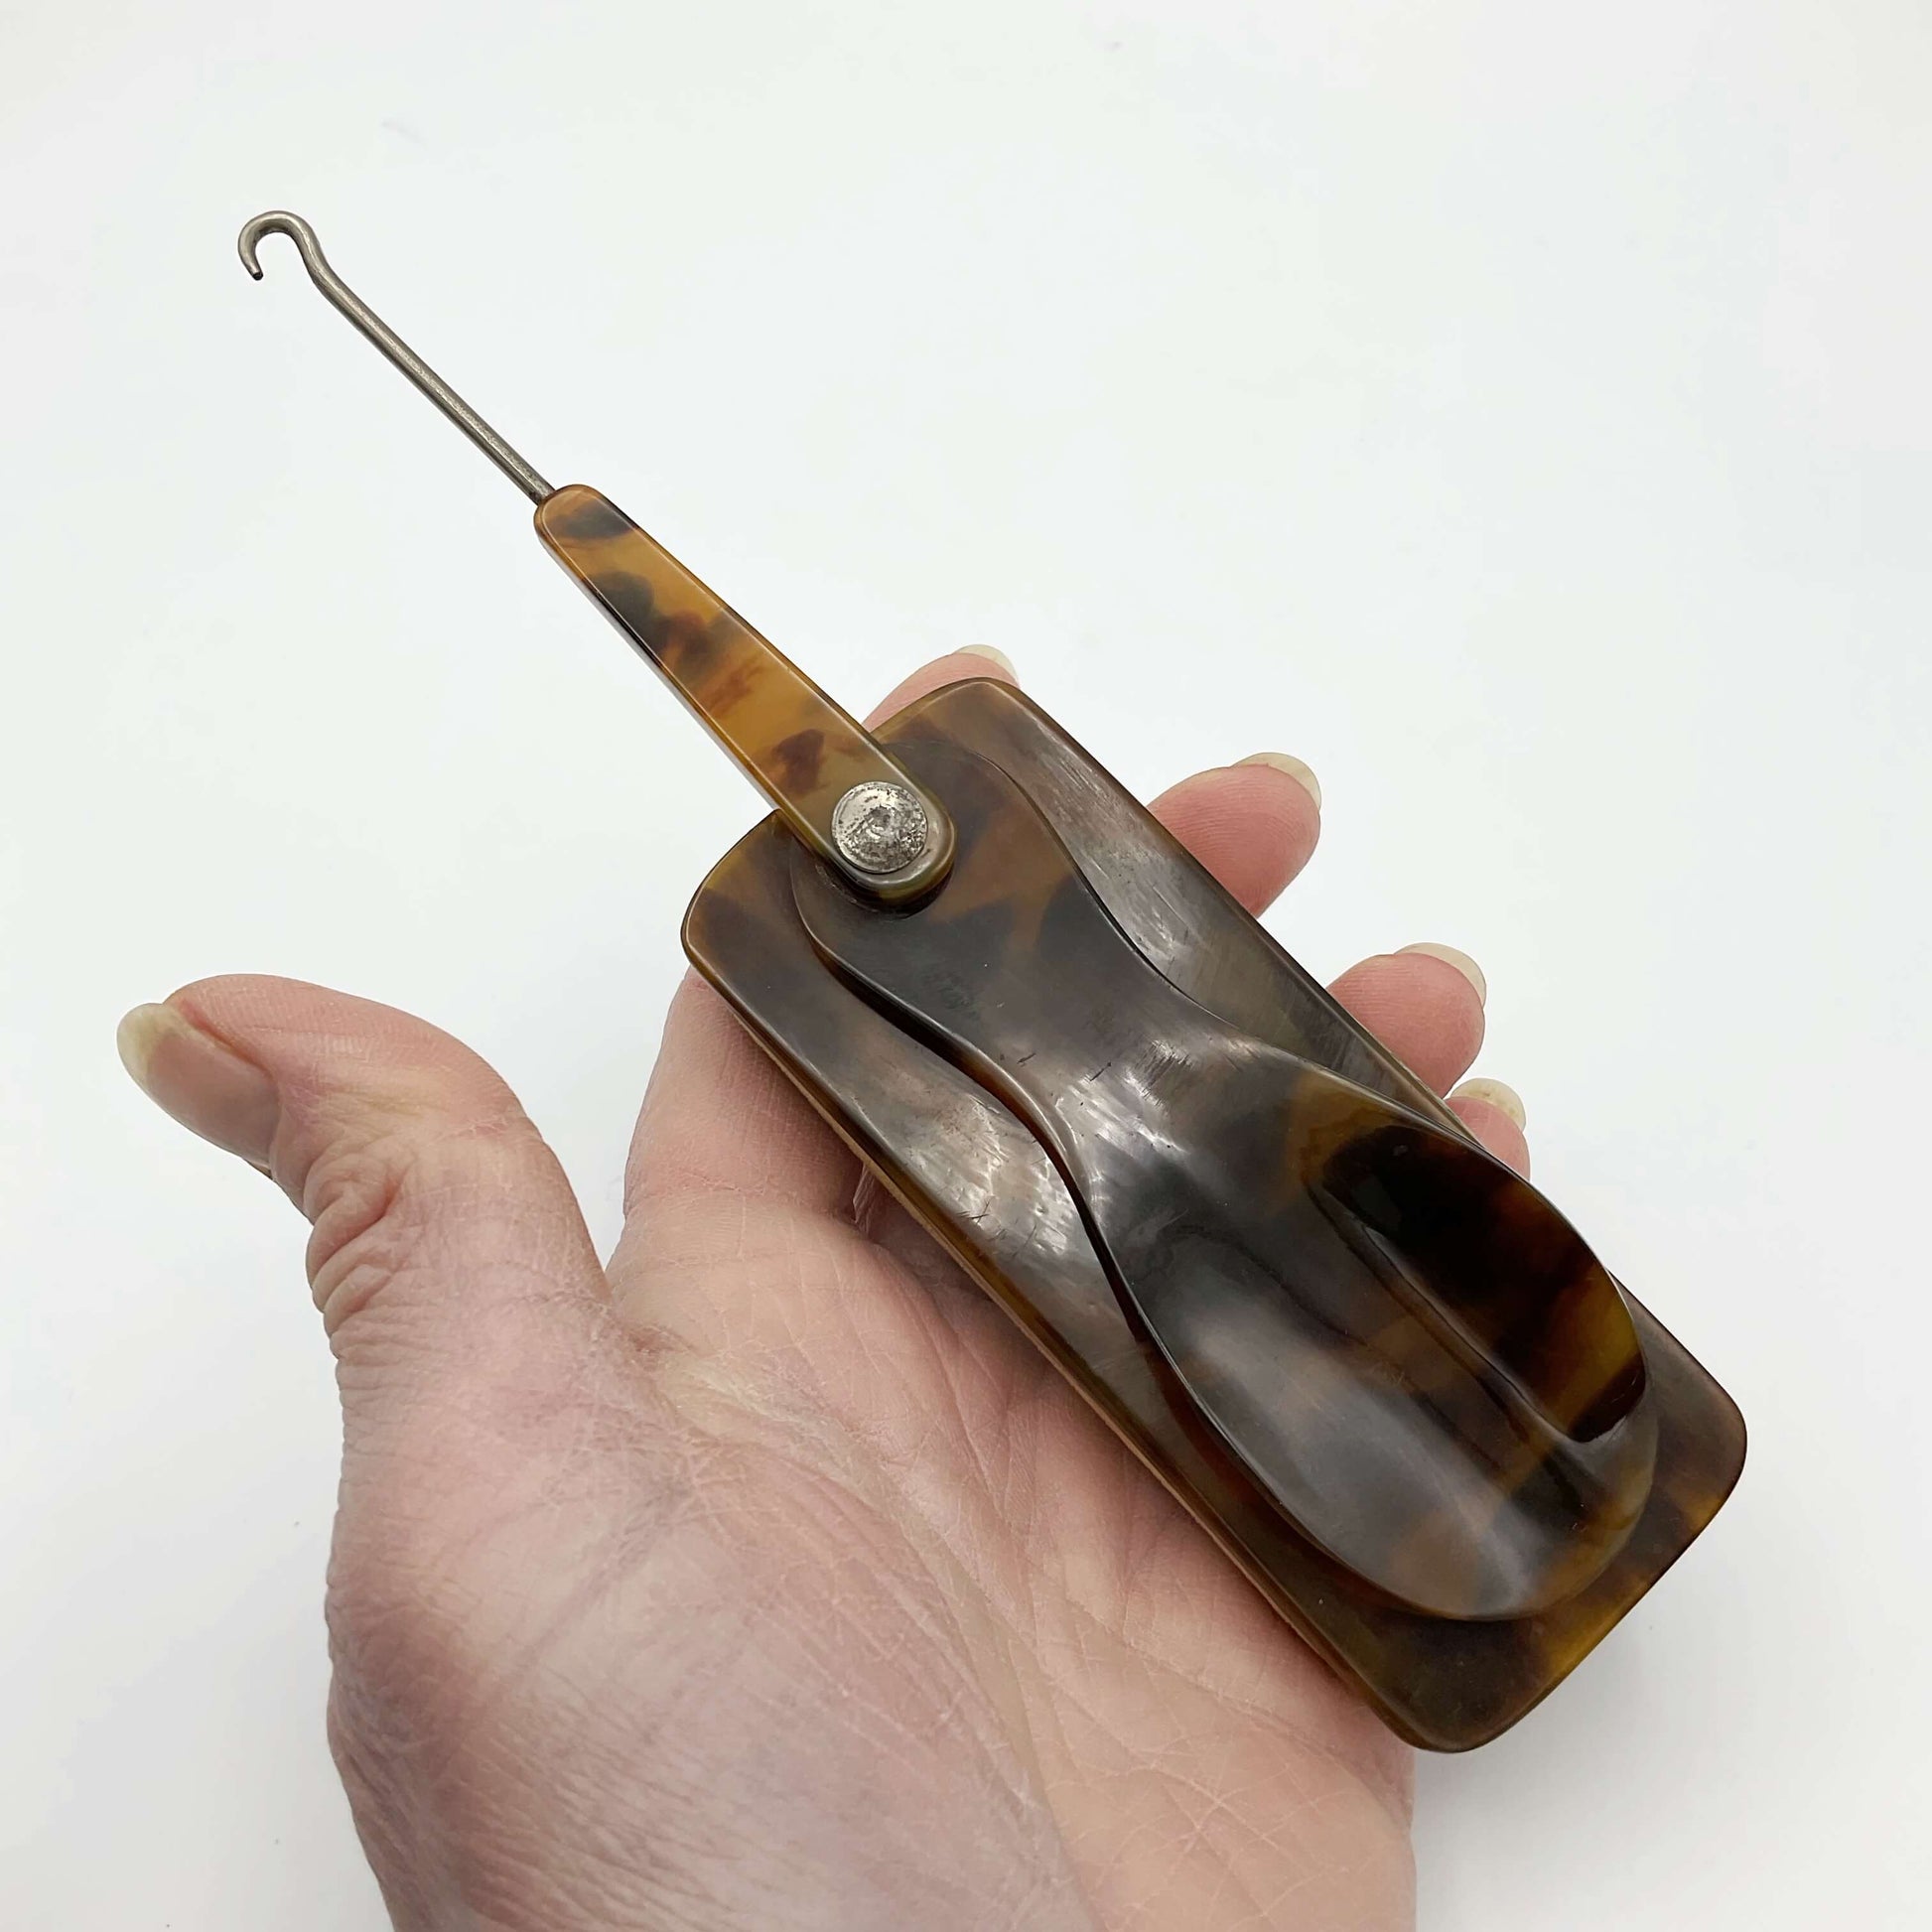 Button hook horn and buffer held in hand